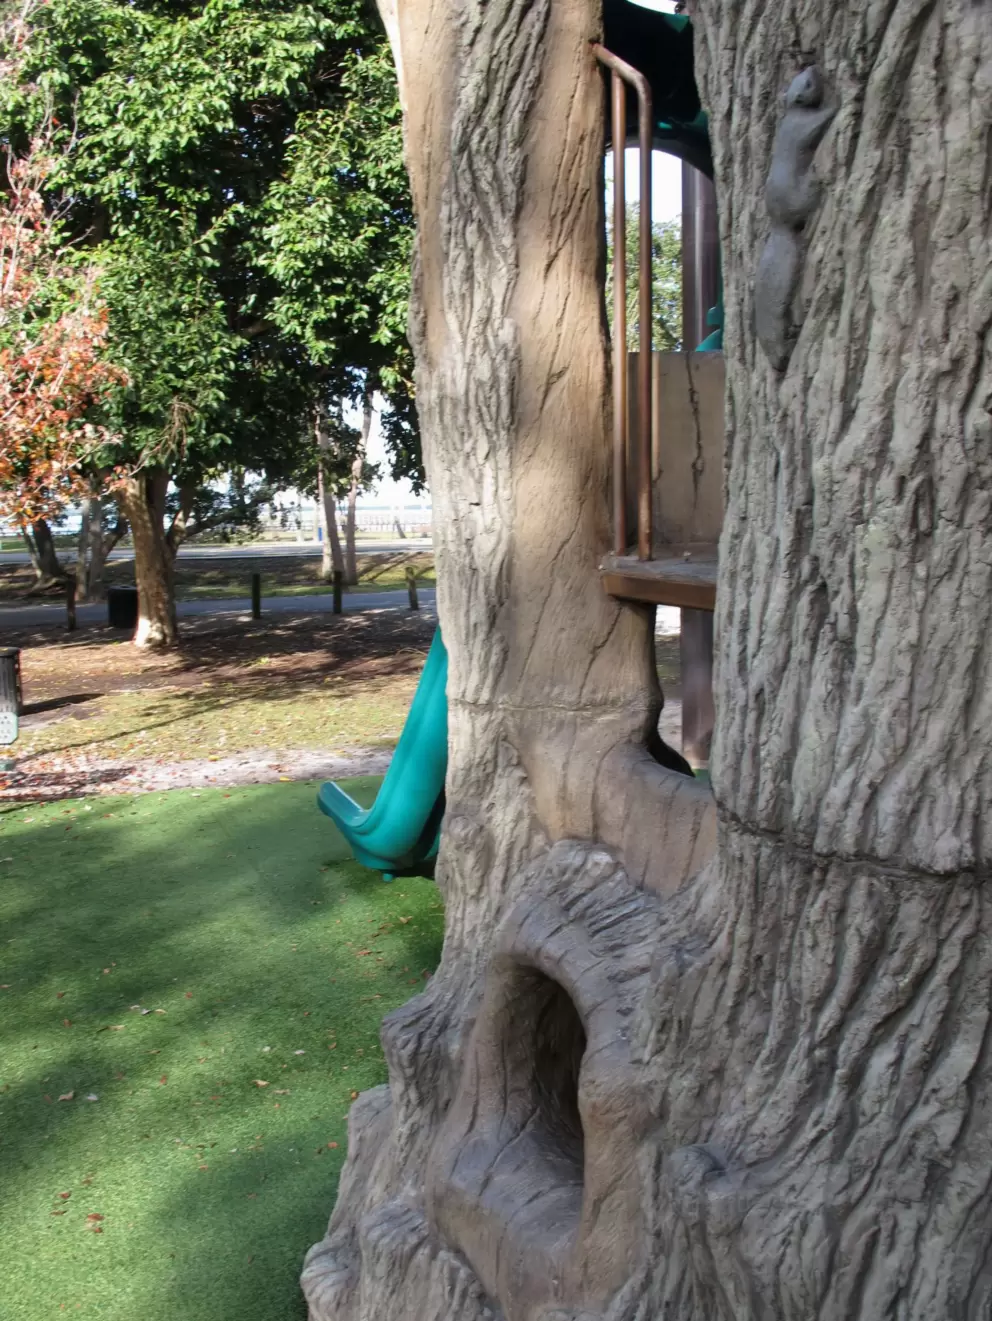 Animal hideout on the playground.